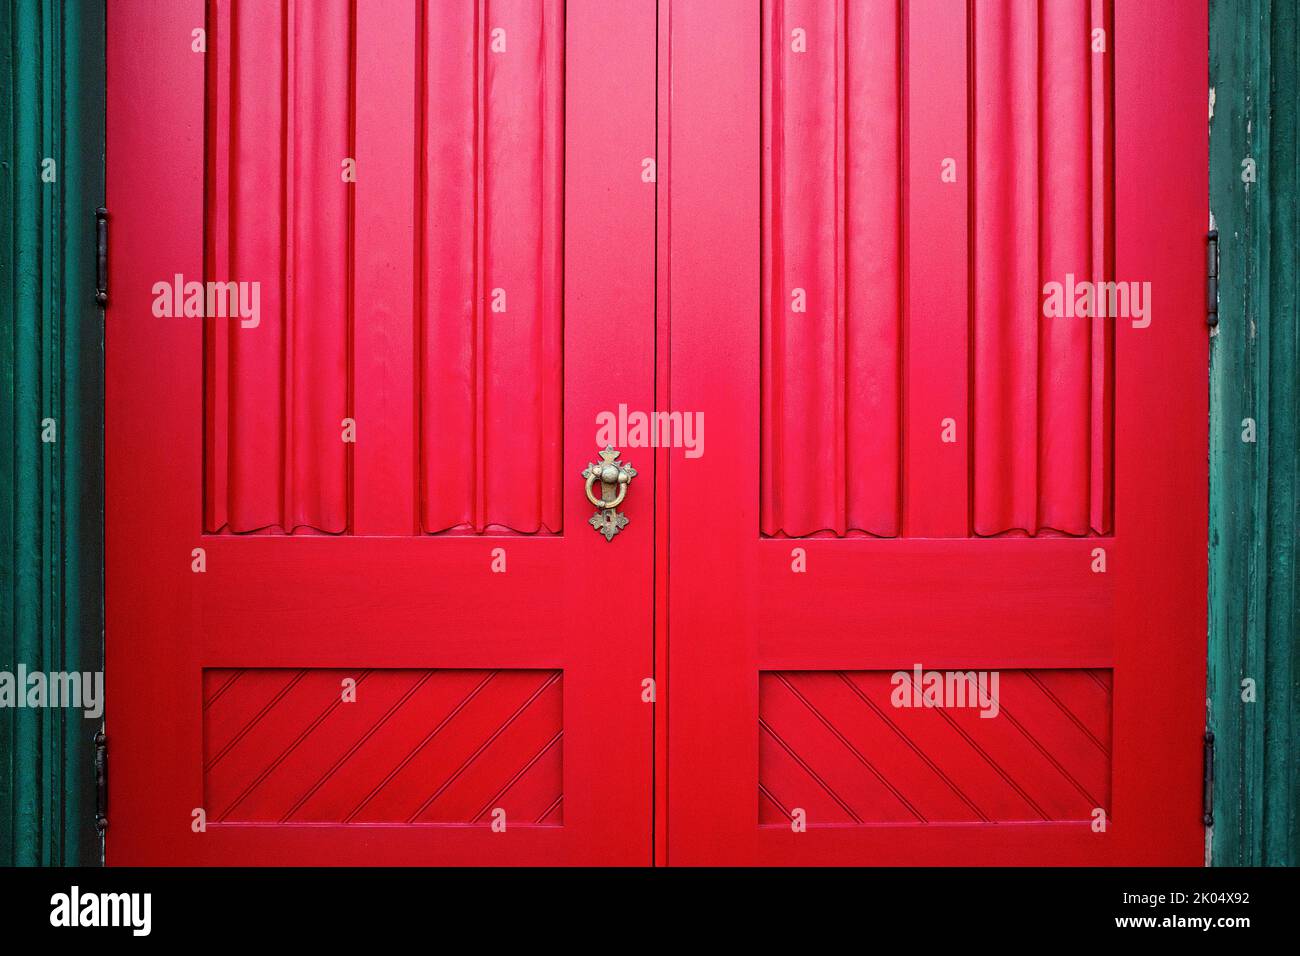 Red Wood Doors with Ornate Metal Handle Stock Photo